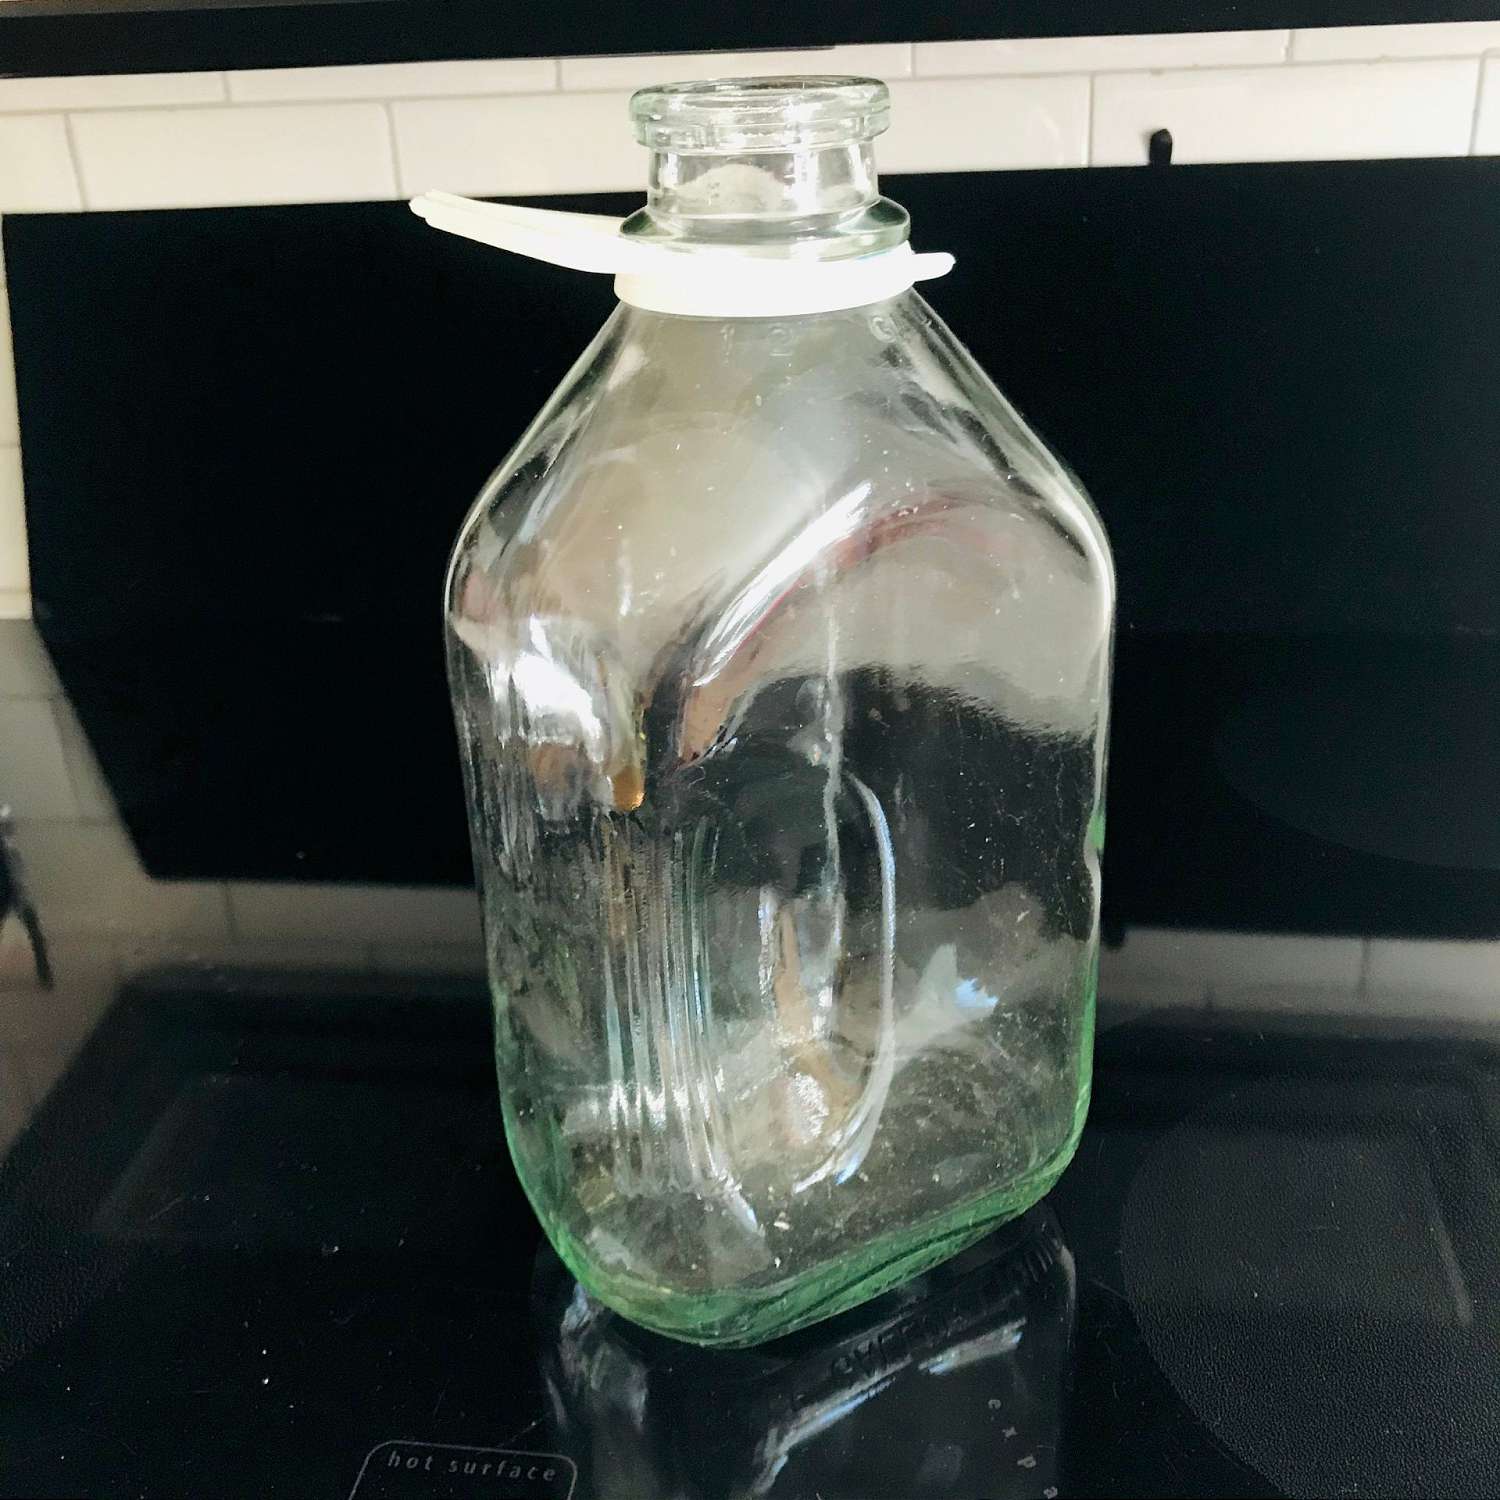 https://www.truevintageantiques.com/wp-content/uploads/2019/12/vintage-1-2-gallon-glass-milk-jug-delivery-bottle-with-handle-collectible-farmhouse-display-cabin-cottage-lodge-cold-milk-refrigerator-jar-5df1ac2d8-scaled.jpg